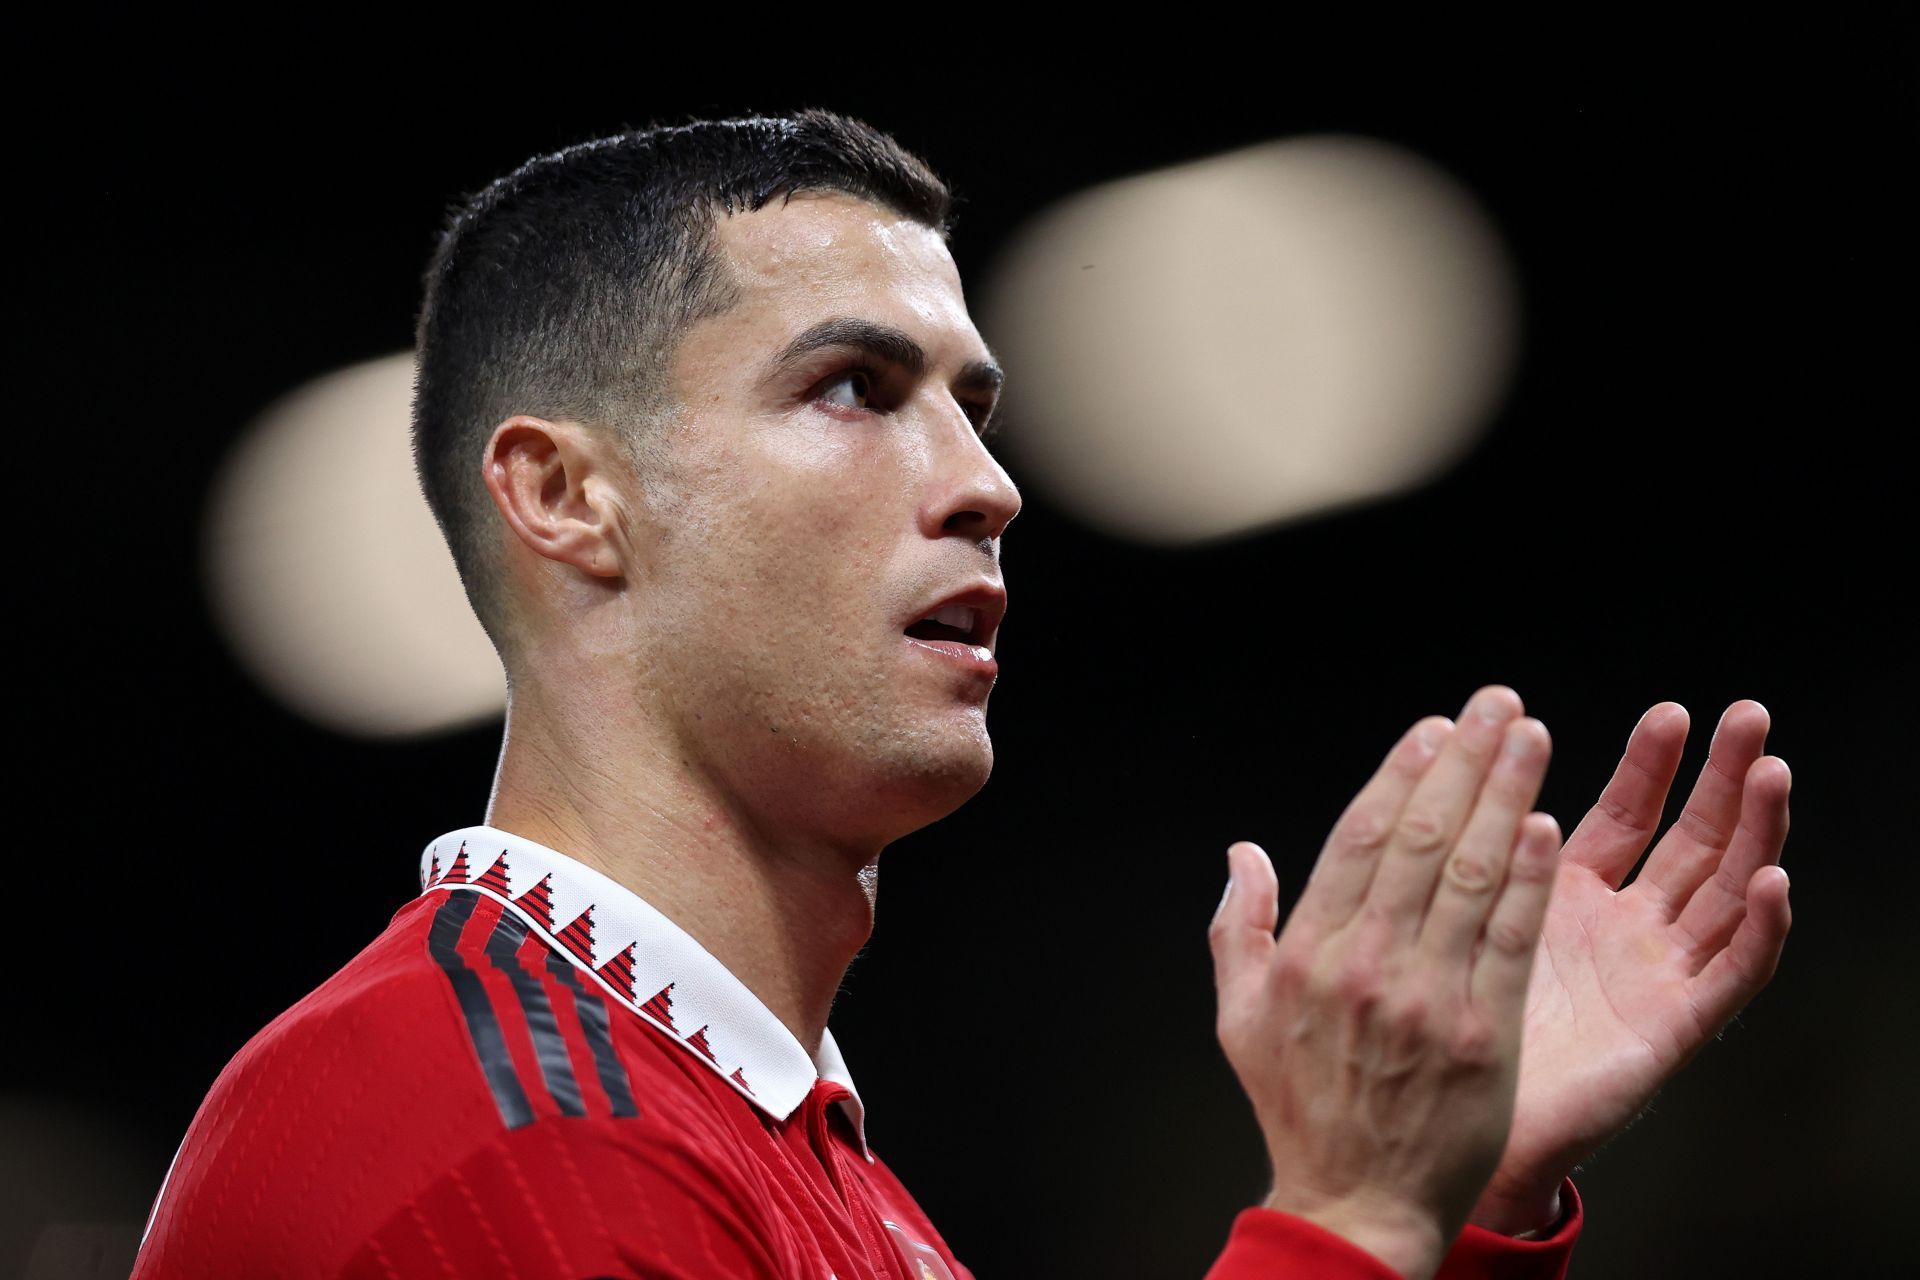 Ronaldo needs to adjust to a new pattern of play at Man Utd